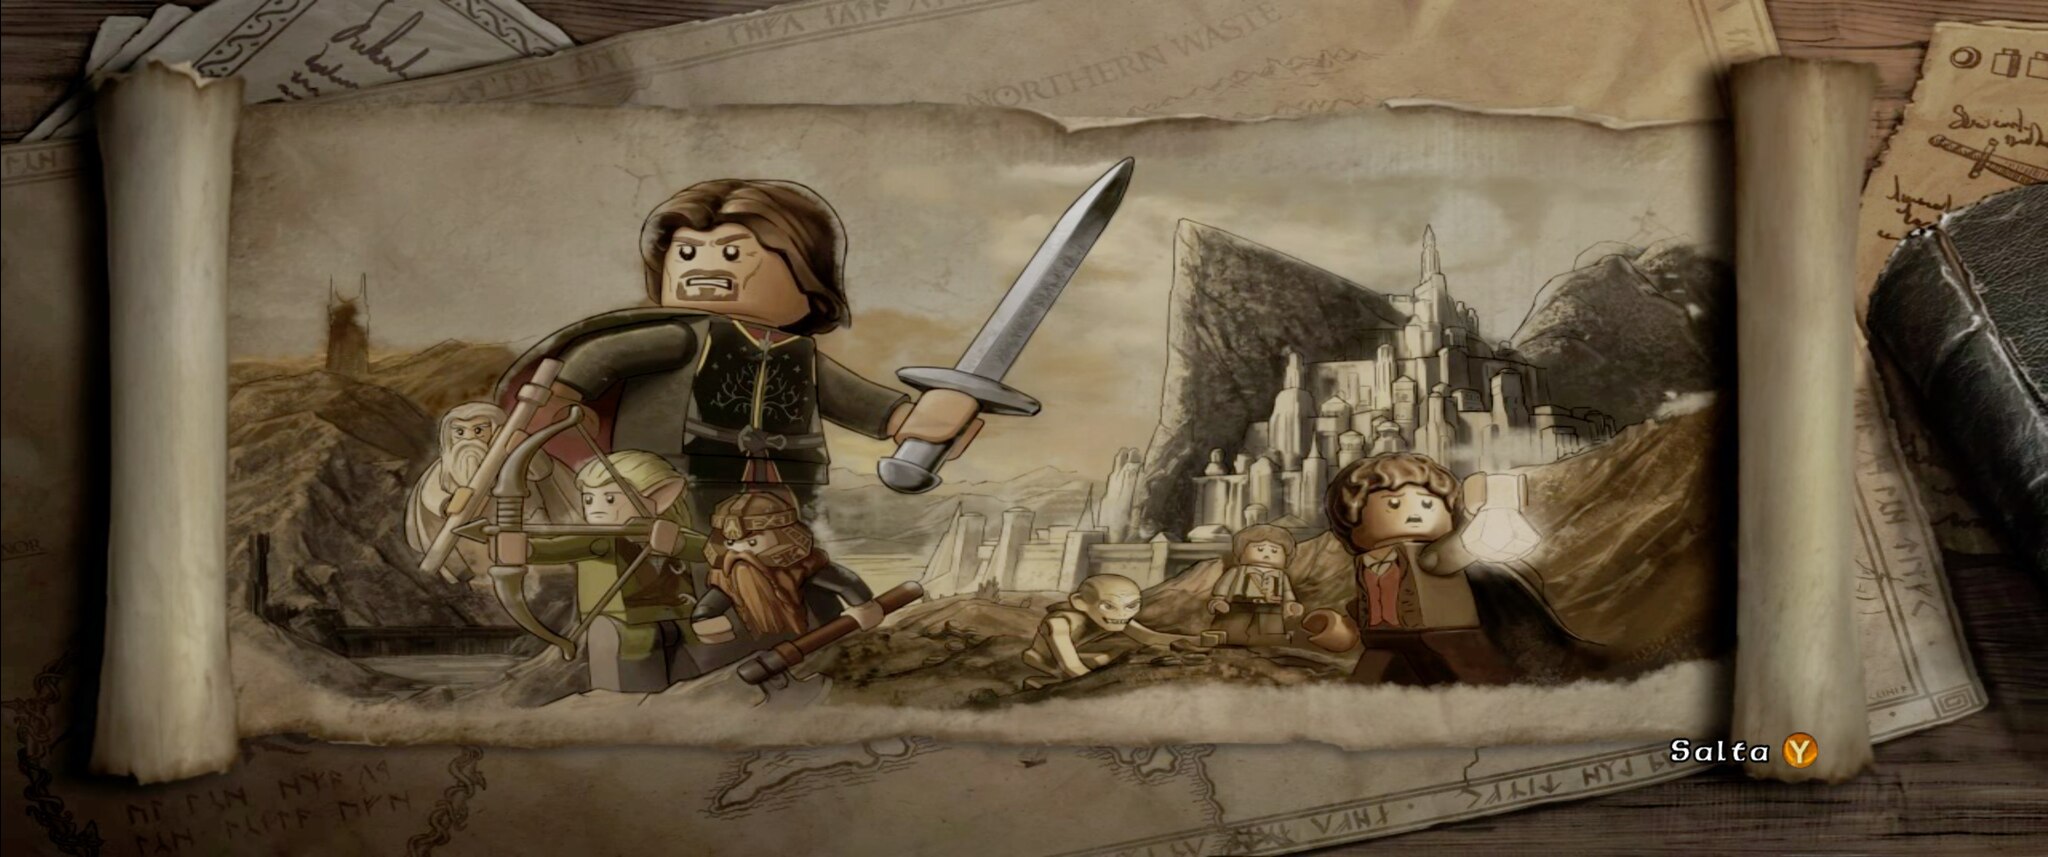 lego lord of the rings 2ds codes